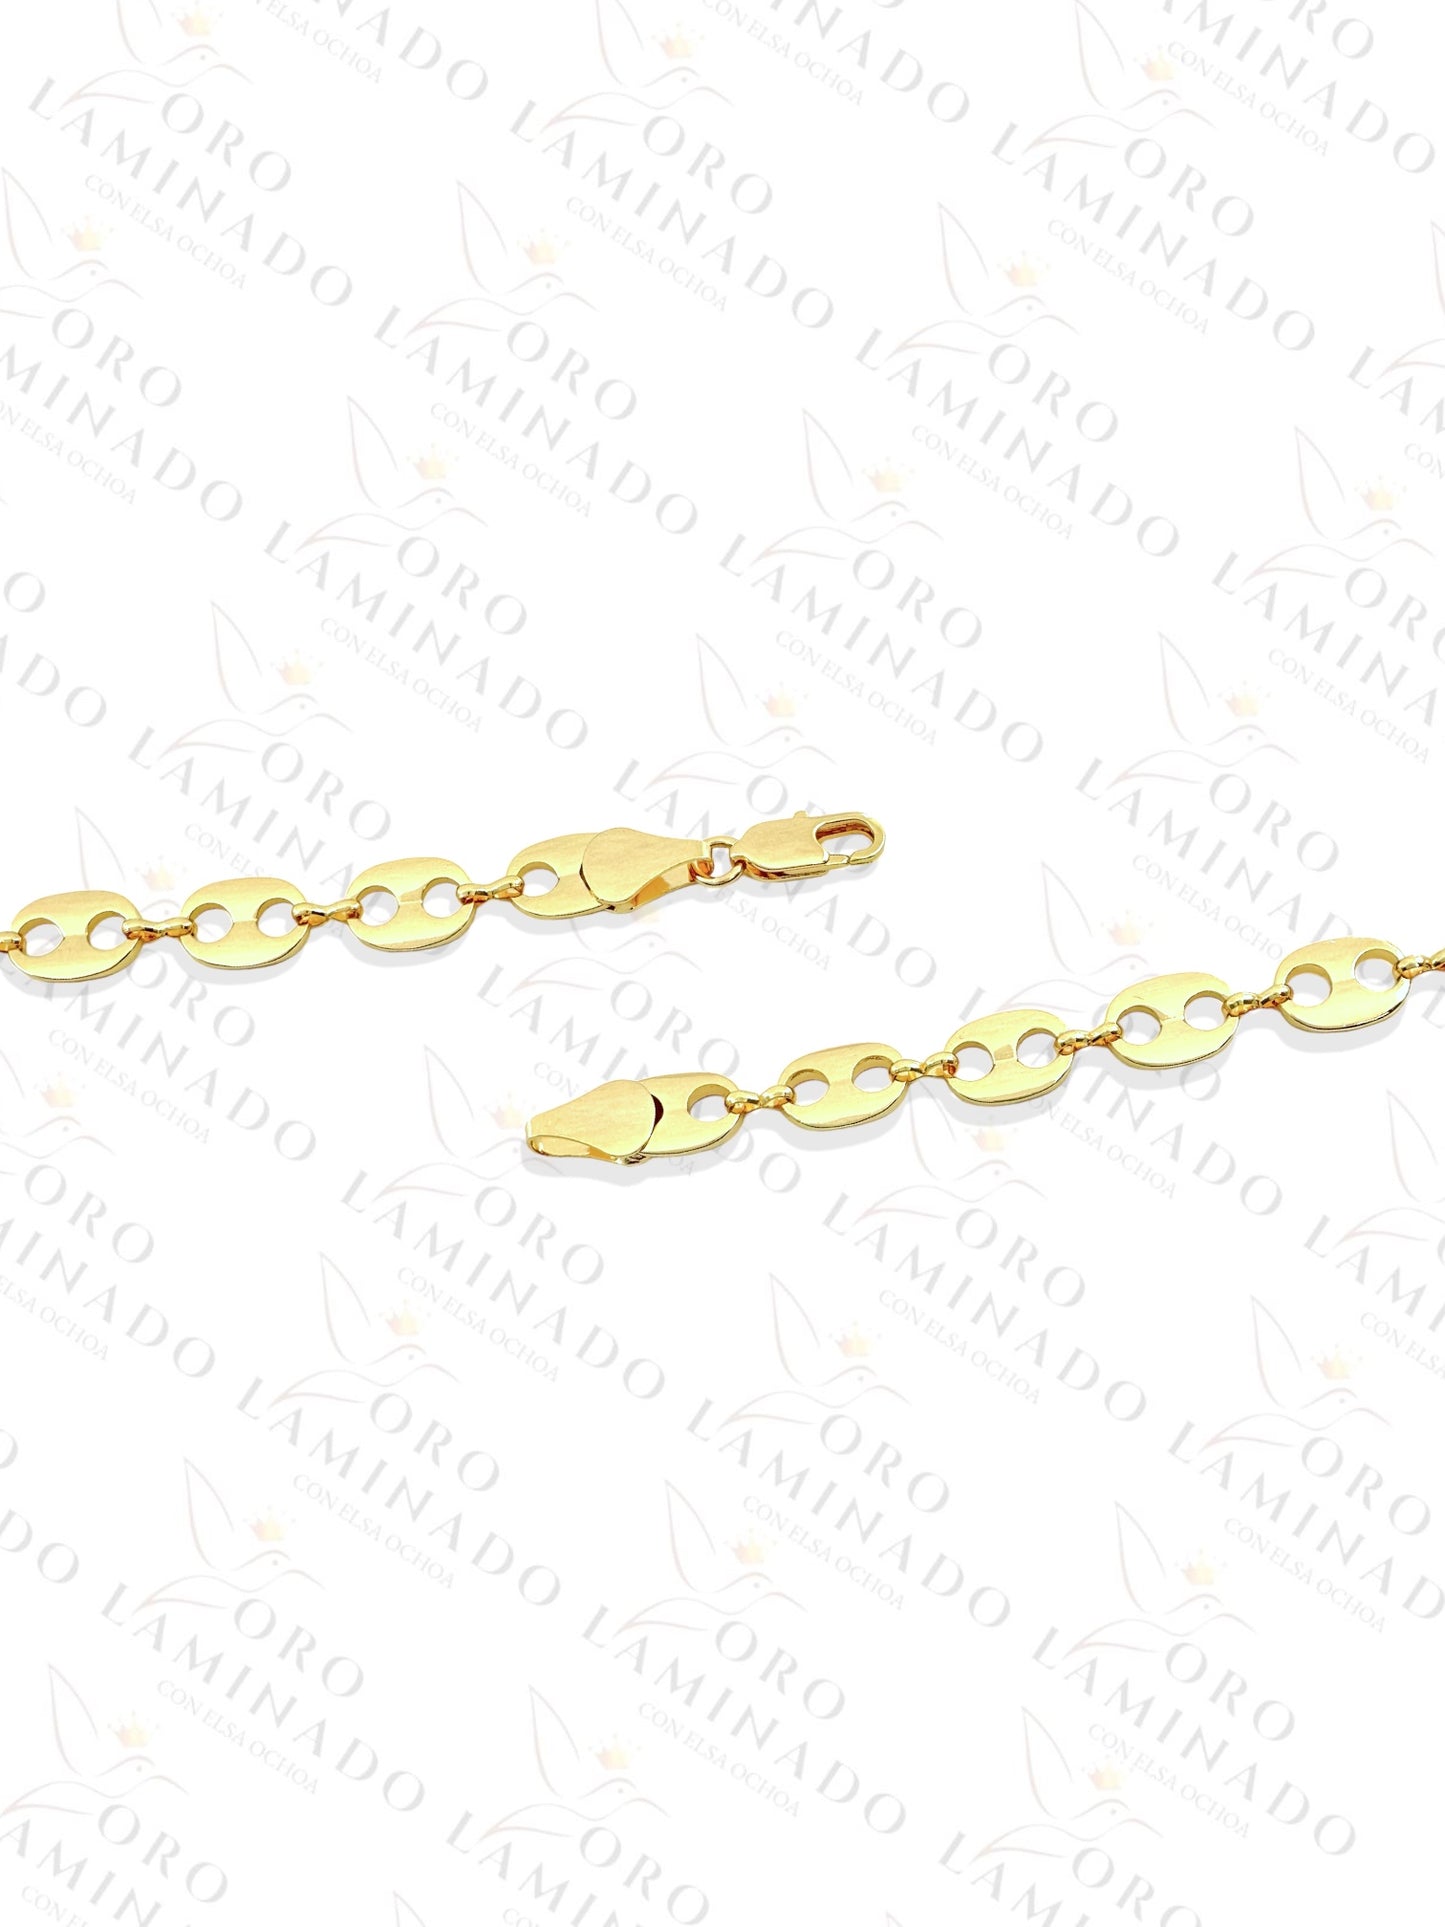 GG Chains Pack of 3 Size 18" 10mm Y350